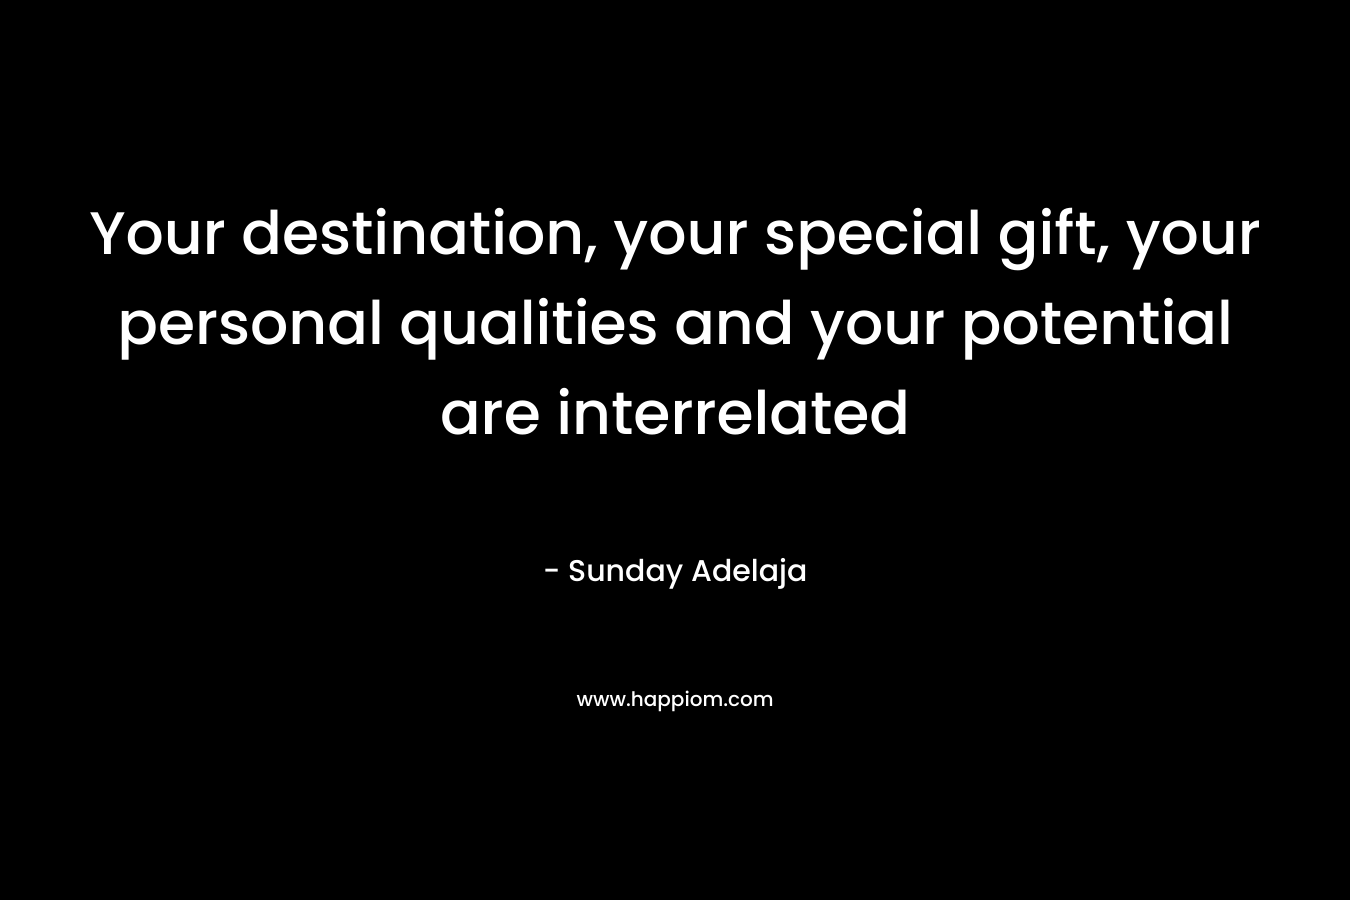 Your destination, your special gift, your personal qualities and your potential are interrelated – Sunday Adelaja